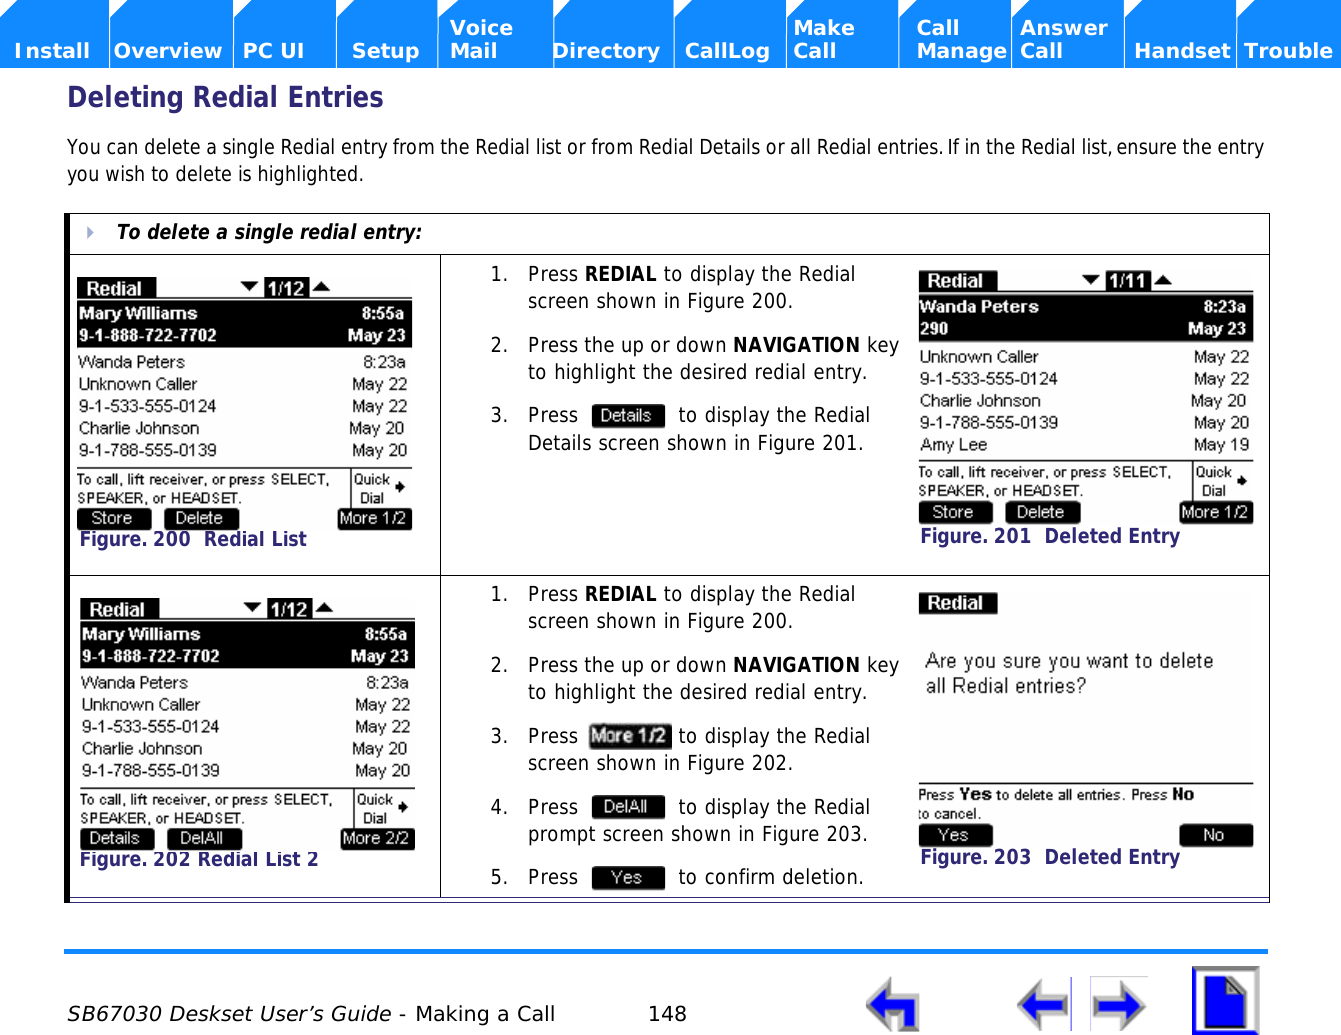  SB67030 Deskset User’s Guide - Making a Call 148    Voice Make Call Answer  Install Overview PC UI Setup Mail Directory CallLog Call Manage Call Handset TroubleDeleting Redial EntriesYou can delete a single Redial entry from the Redial list or from Redial Details or all Redial entries. If in the Redial list, ensure the entry you wish to delete is highlighted.To delete a single redial entry:1. Press REDIAL to display the Redial screen shown in Figure 200.2. Press the up or down NAVIGATION key to highlight the desired redial entry.3. Press   to display the Redial Details screen shown in Figure 201.1. Press REDIAL to display the Redial screen shown in Figure 200. 2. Press the up or down NAVIGATION key to highlight the desired redial entry.3. Press   to display the Redial screen shown in Figure 202.4. Press   to display the Redial prompt screen shown in Figure 203.5. Press   to confirm deletion.Figure. 200  Redial ListFigure. 201  Deleted EntryFigure. 202 Redial List 2Figure. 203  Deleted Entry